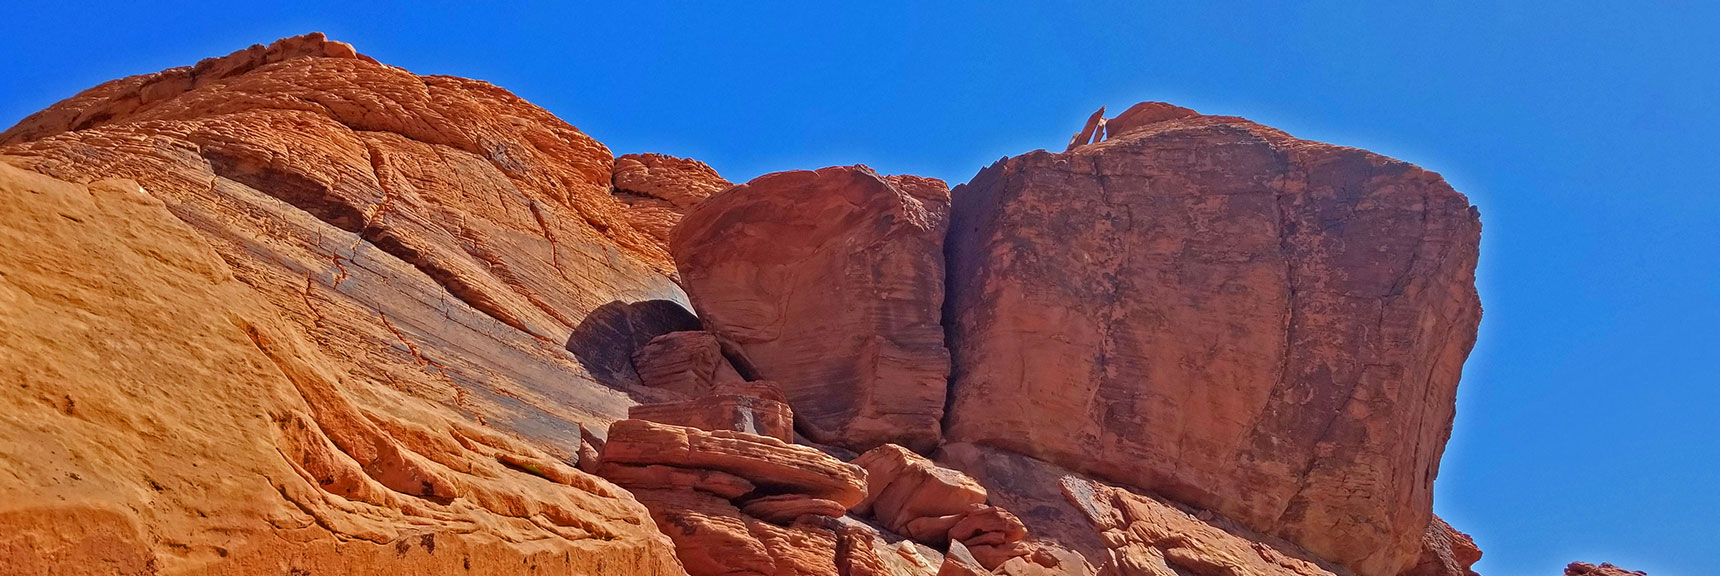 Wandering Among Towering Red Rock Cliffs | Little Red Rock Las Vegas, Nevada, Near La Madre Mountains Wilderness